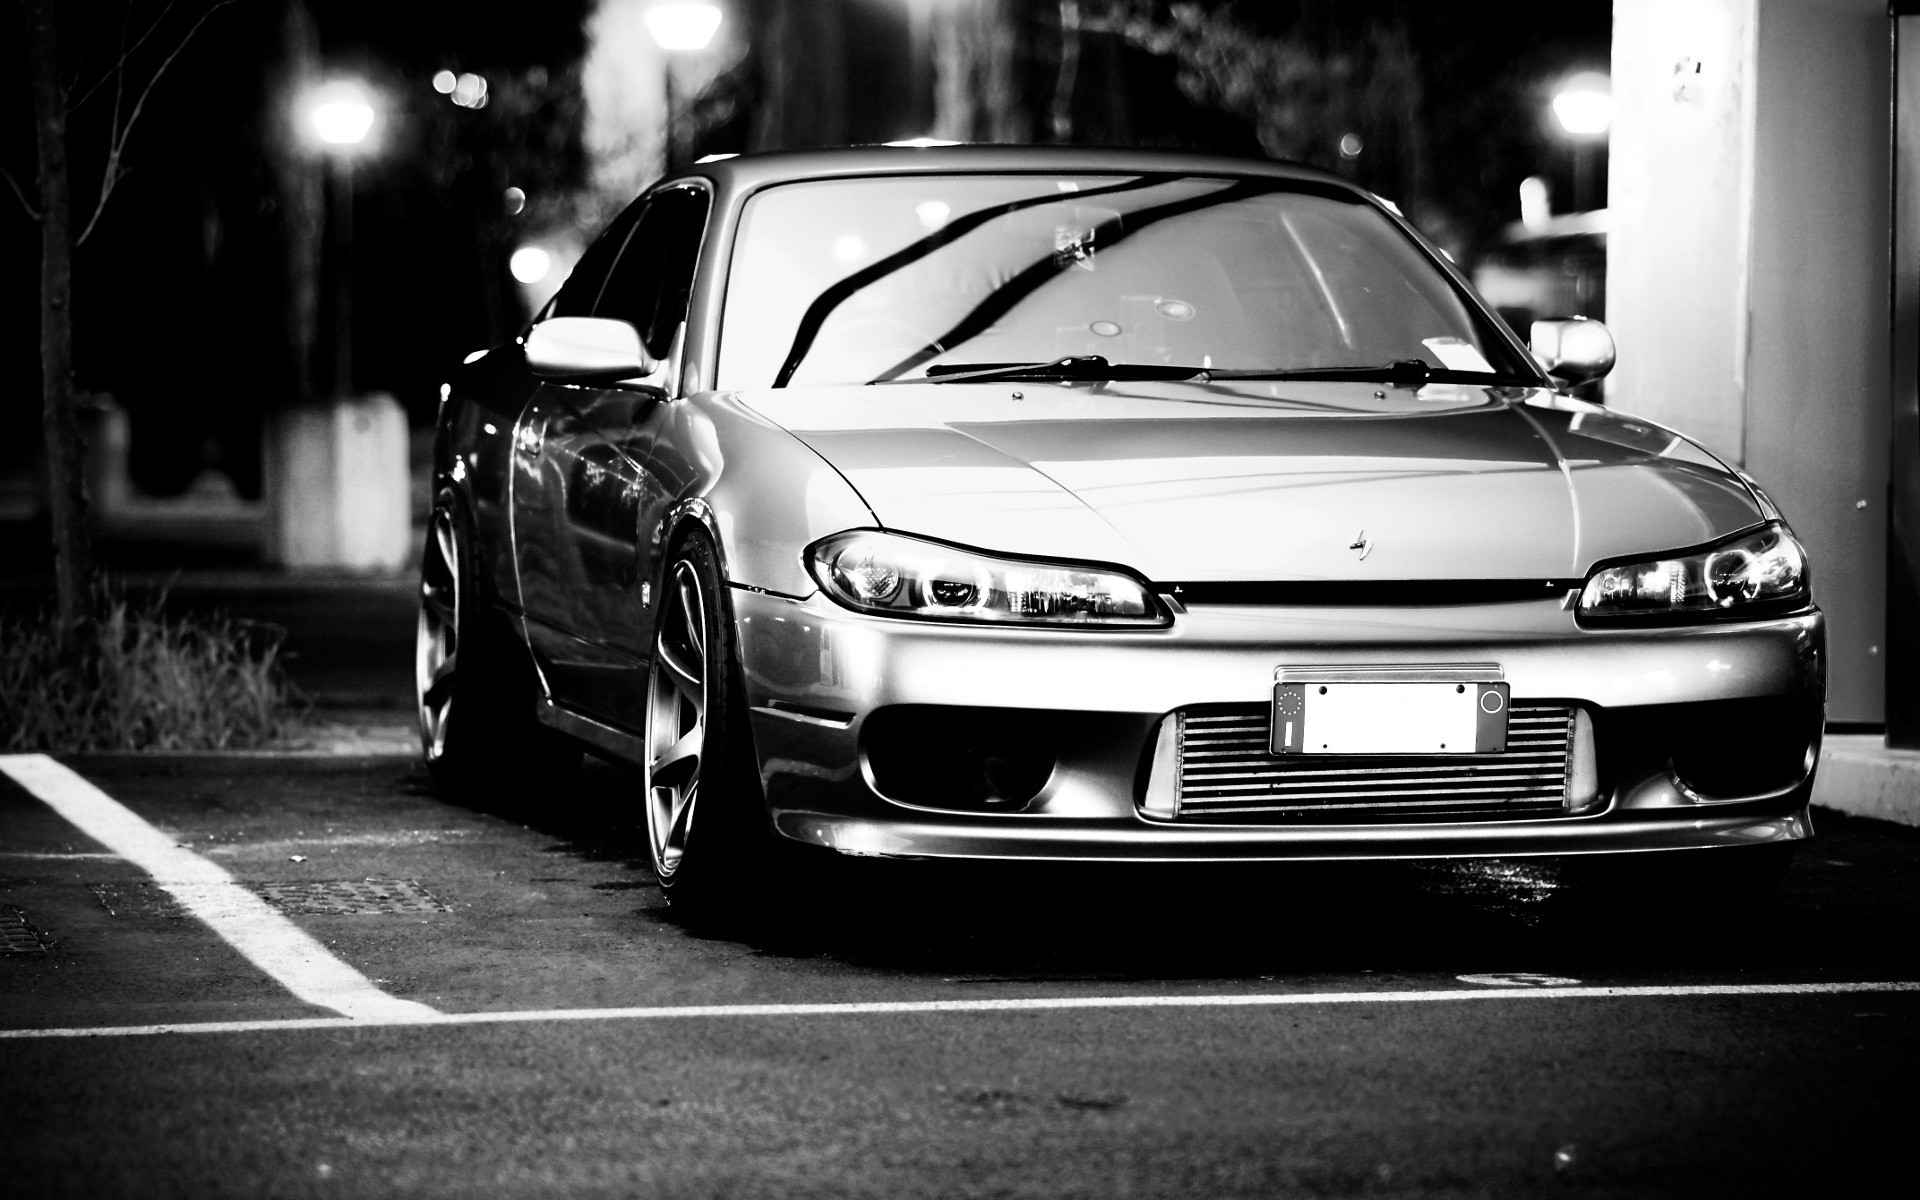 Cars Monochrome Nissan Silvia S15 Jdm Wallpapers Hd Desktop And Mobile Backgrounds